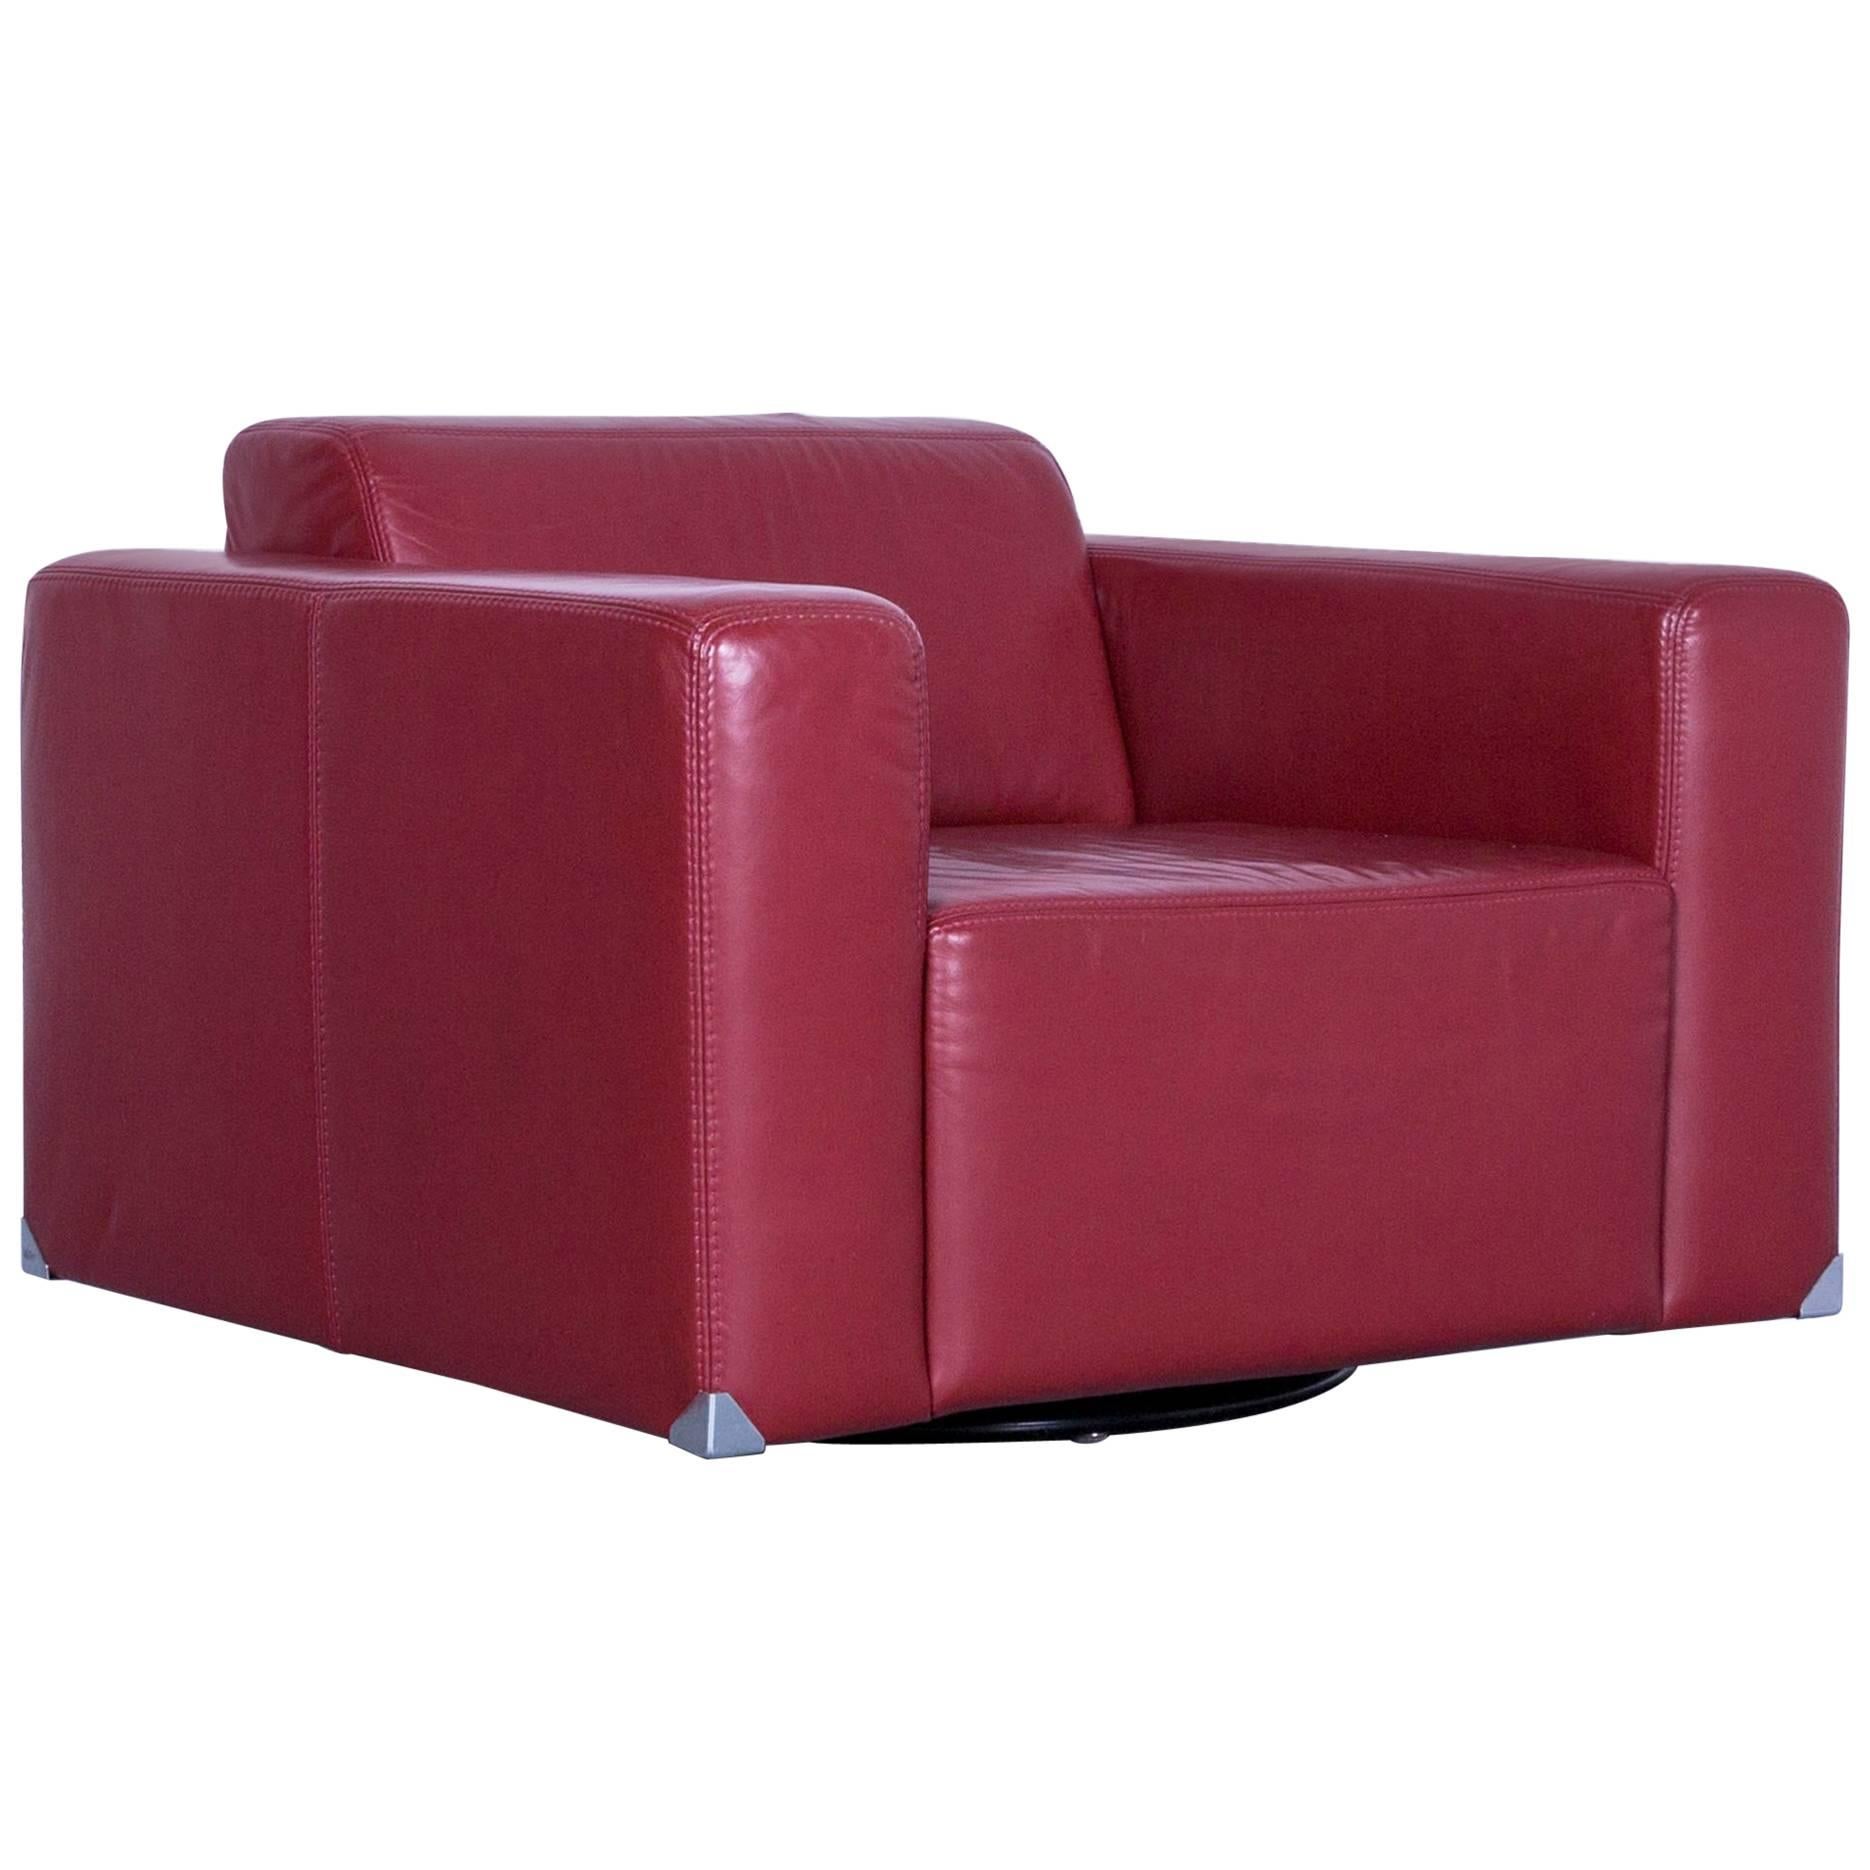 Ewald Schillig Leather Armchair Red One-Seat